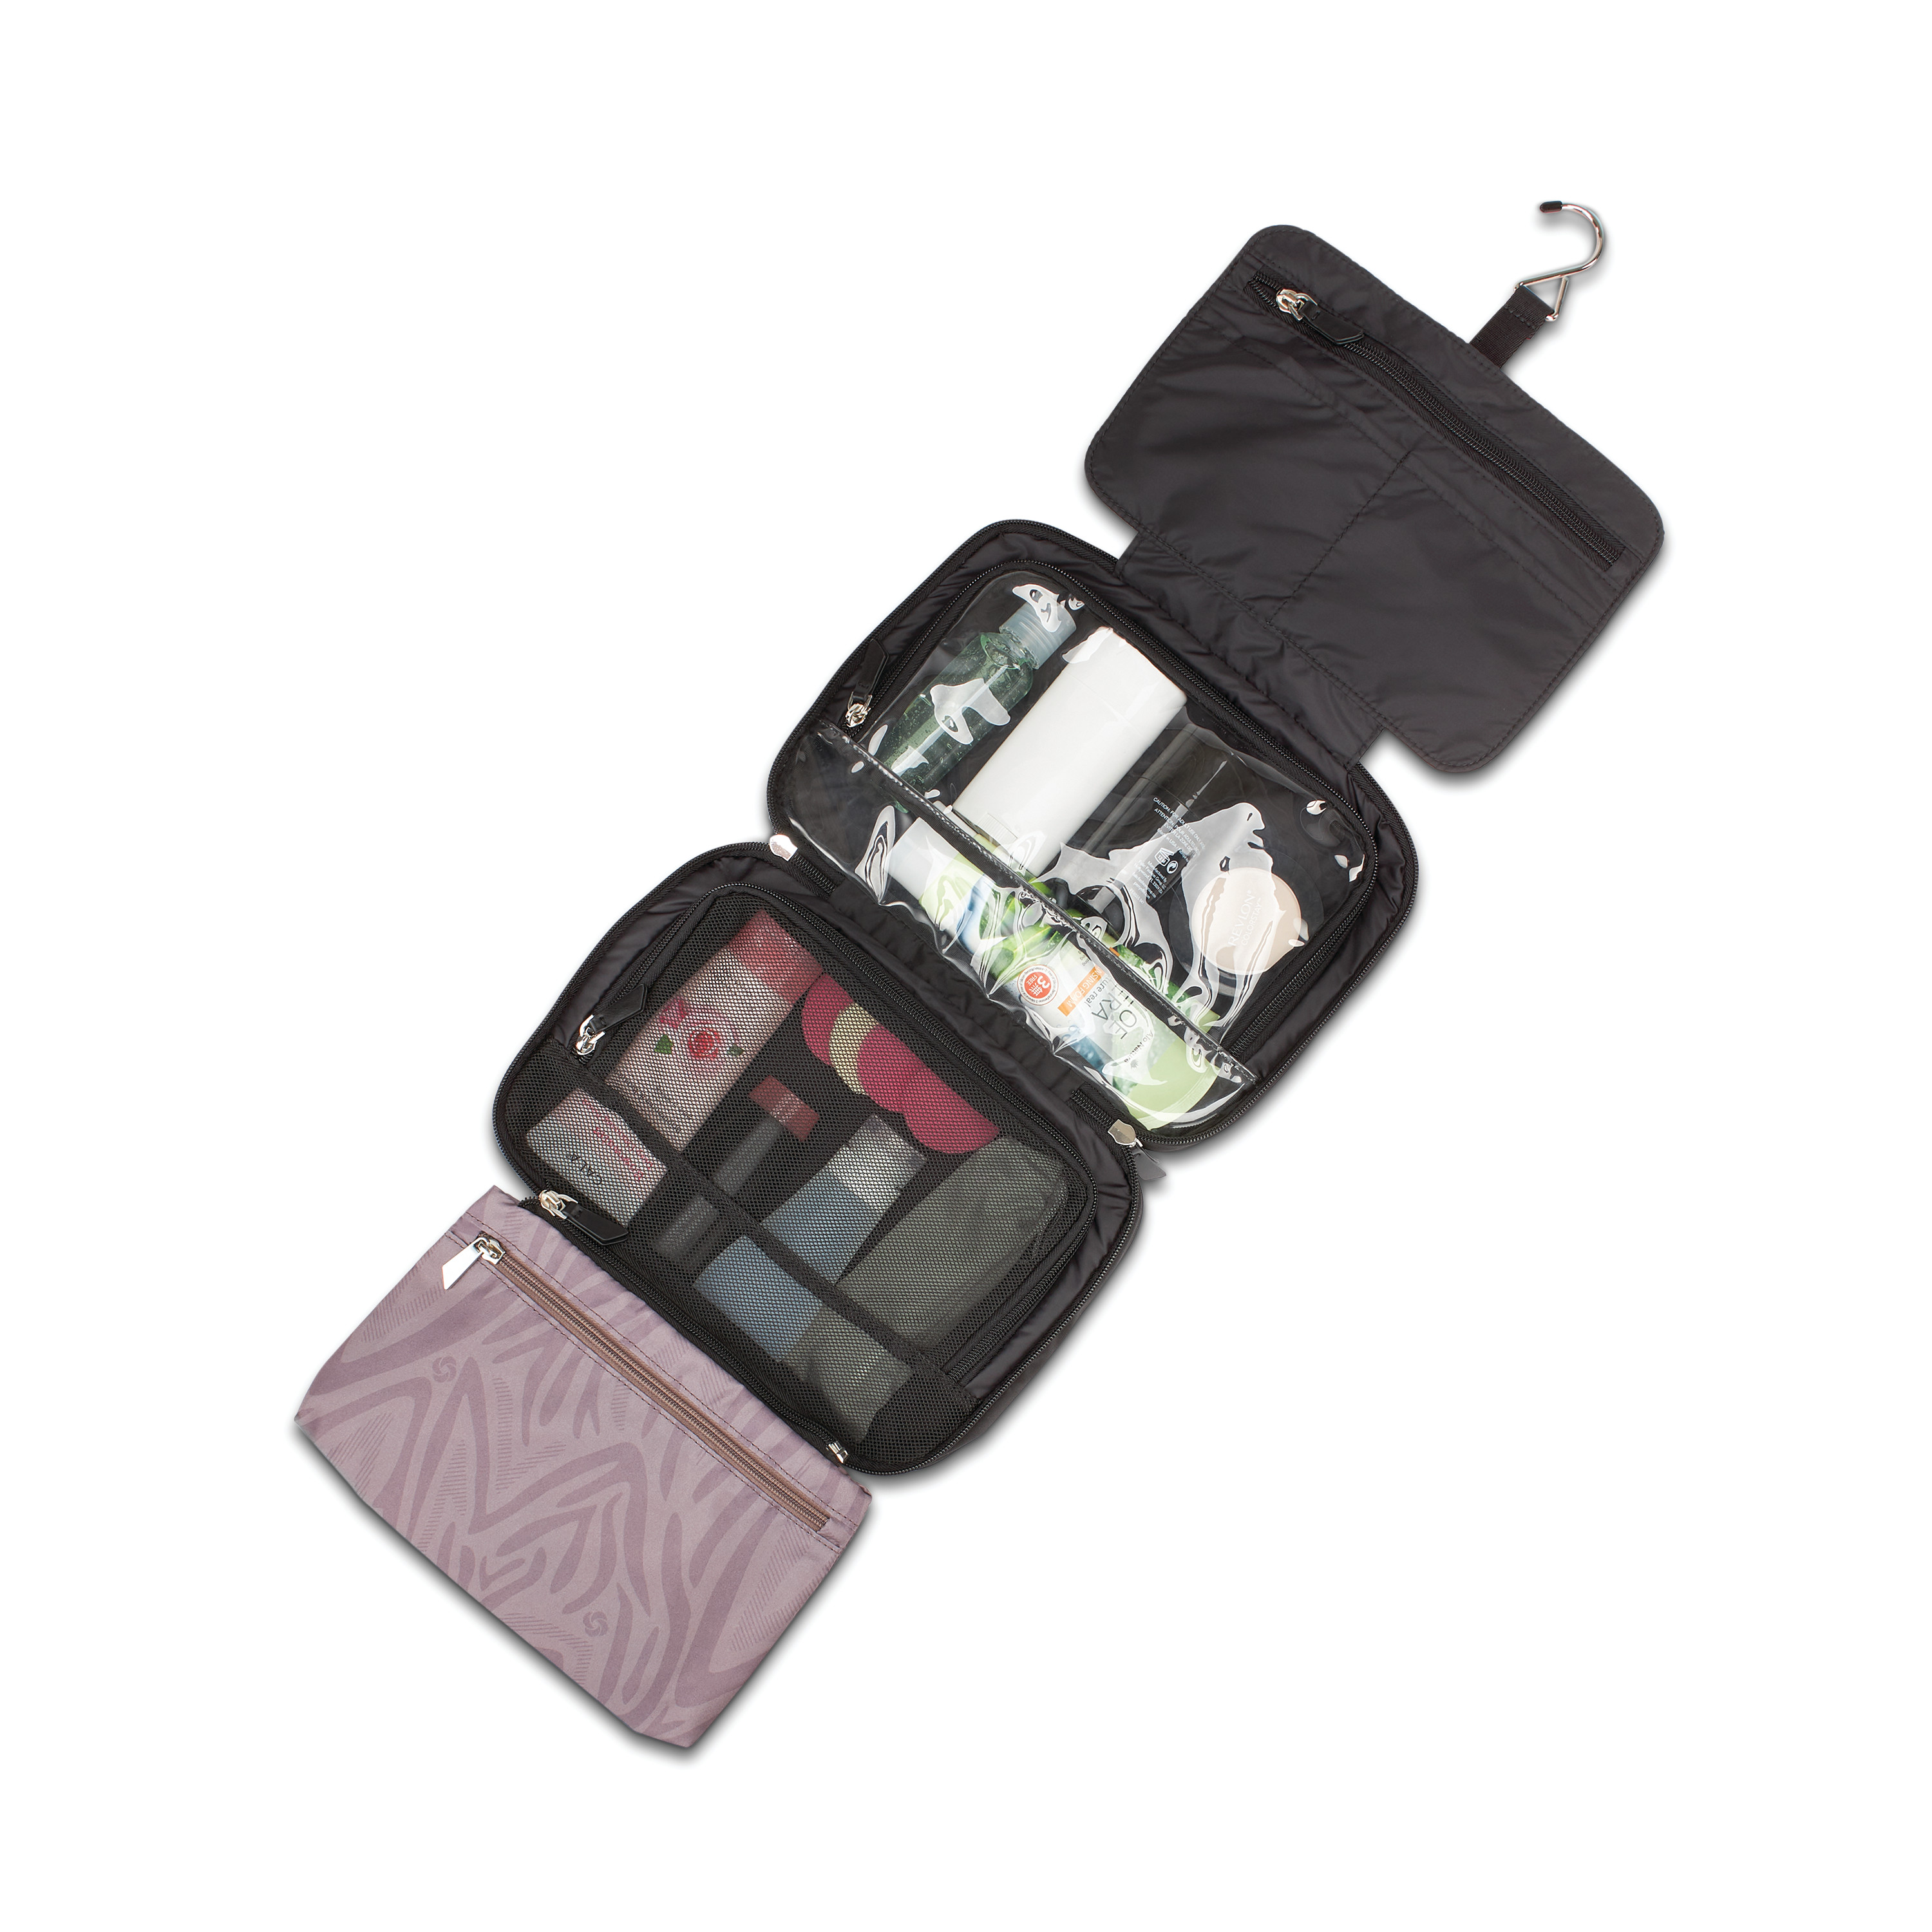 Travel Kits - Shop Travel Kit Bags at Best Prices